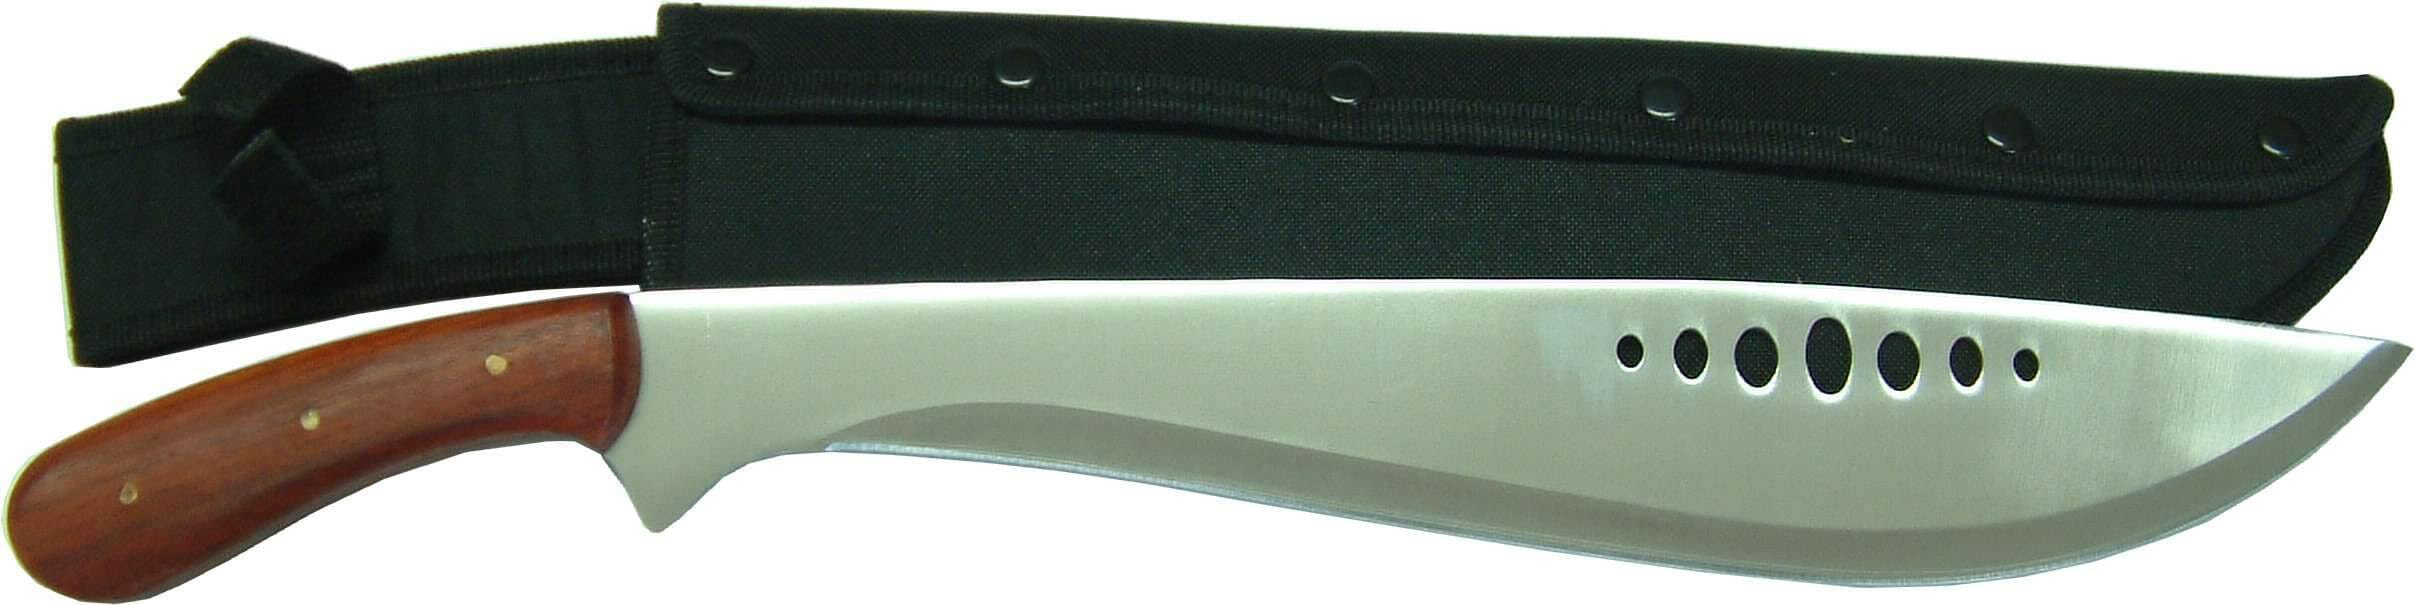 Xcel Machette with Stainless Blade & Wood Handle in Nylon Sheath 400mm